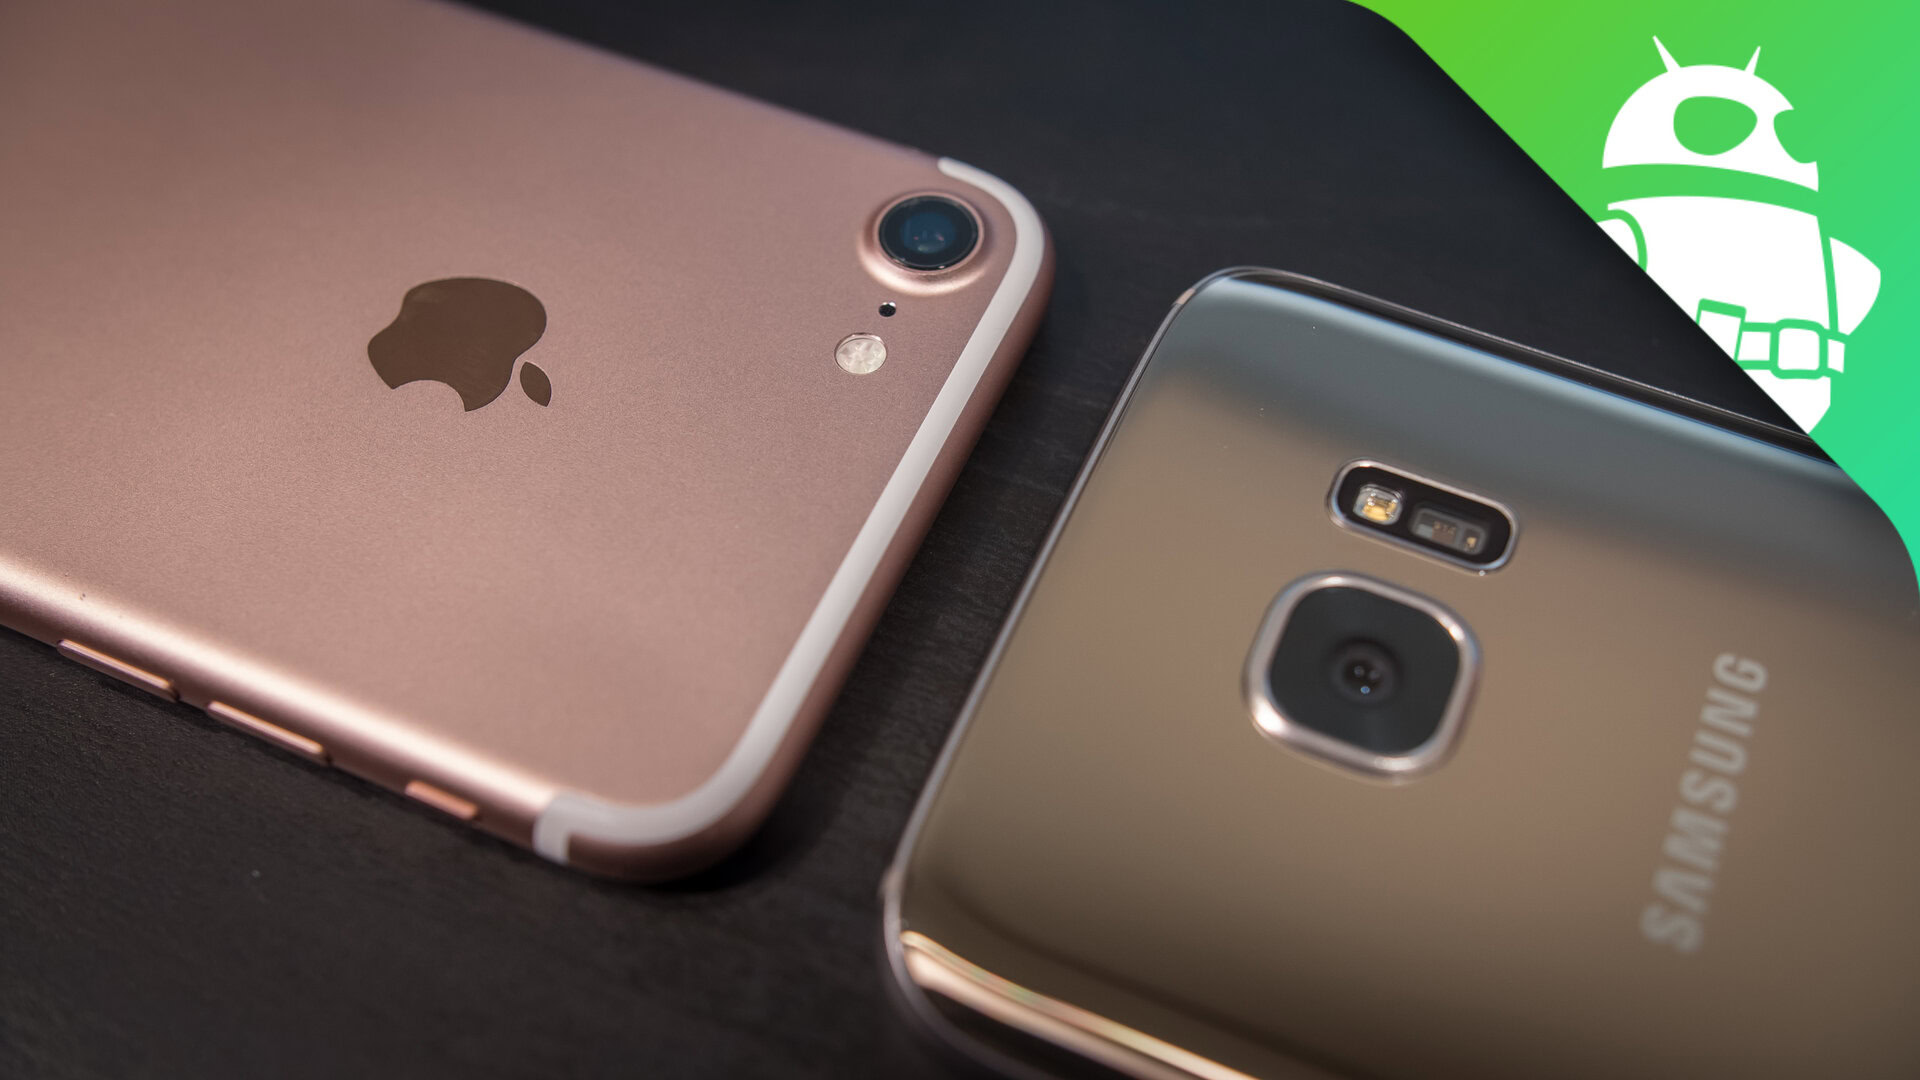 Motel De schuld geven Beleefd Galaxy S7 vs iPhone 7 camera shootout - Android Authority